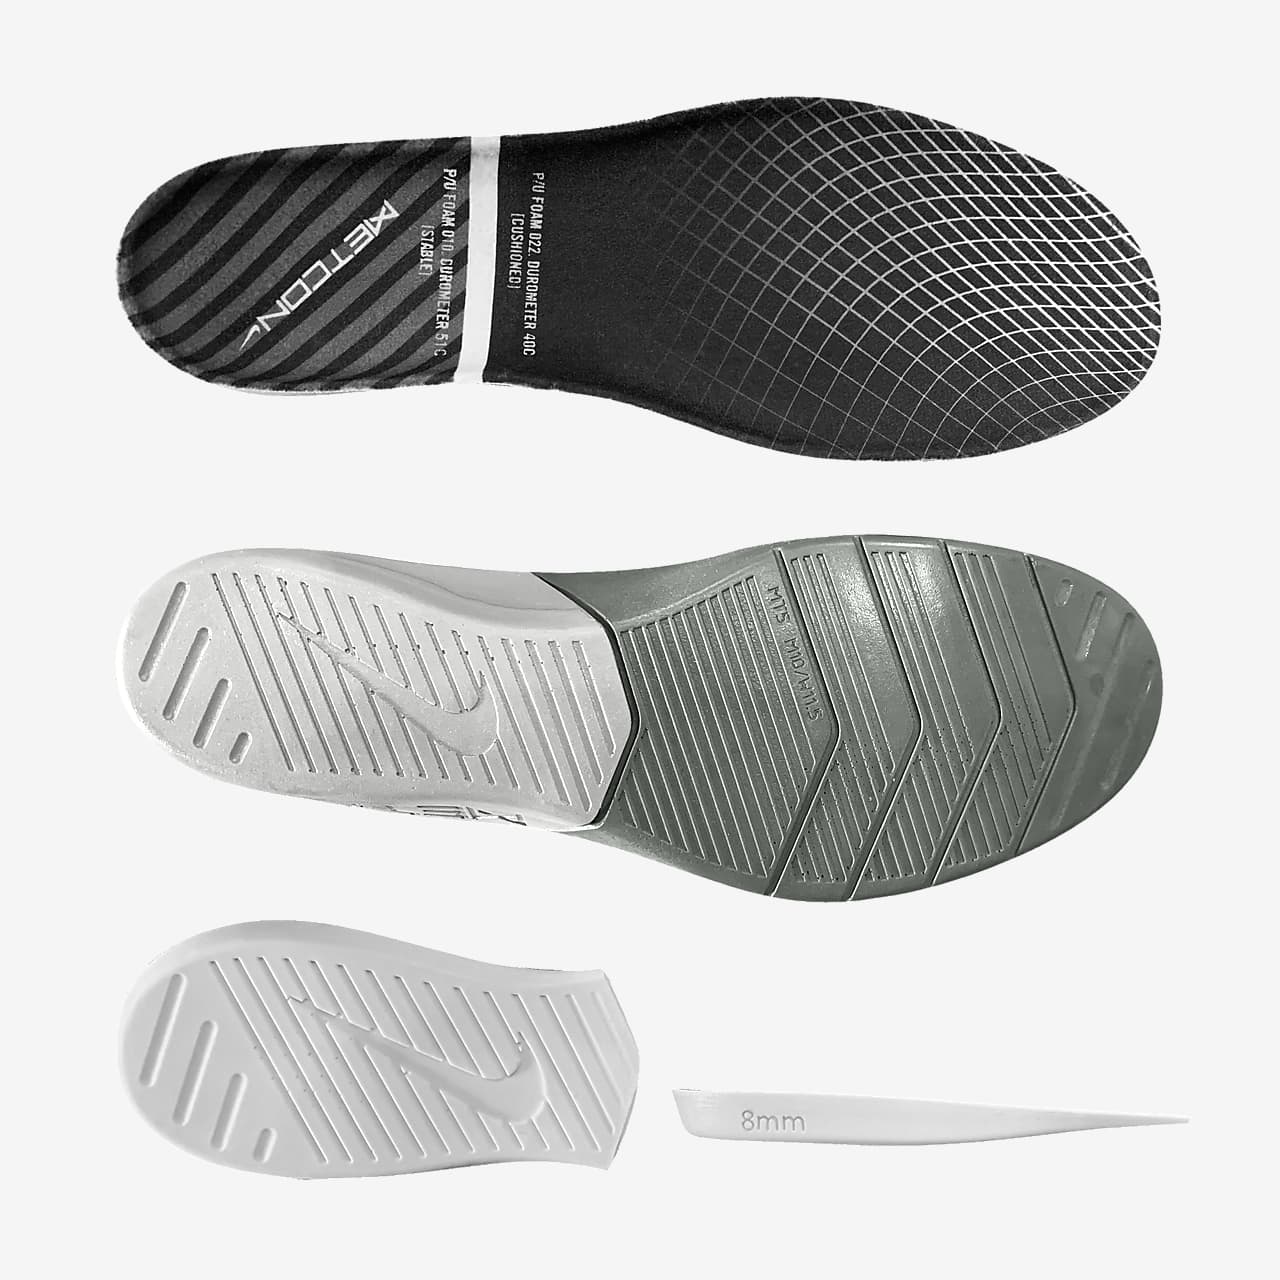 nike shoes with sock liner